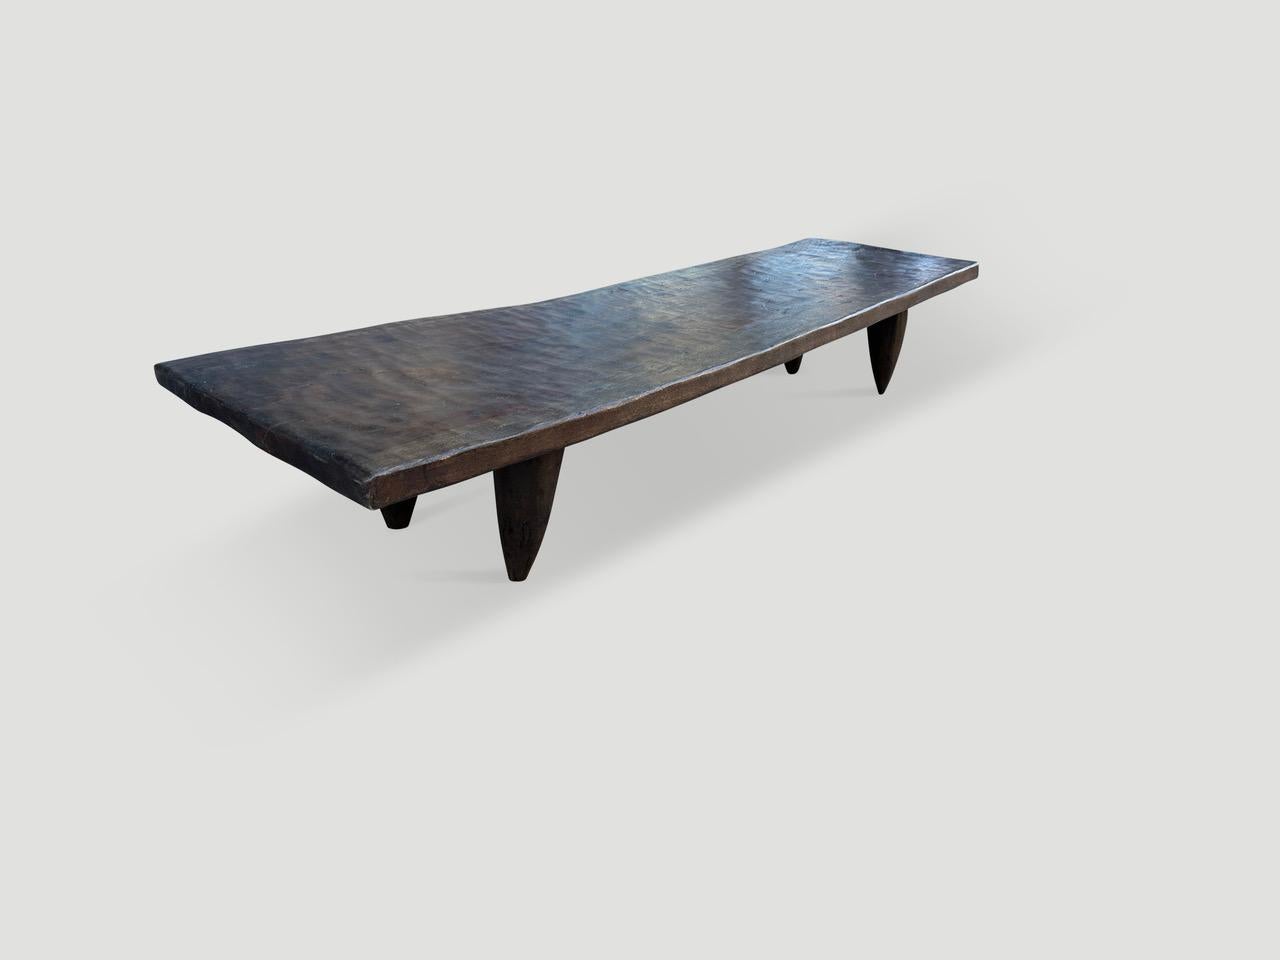 Rare antique coffee table hand carved by the Senufo tribes from a single block of Iroko wood, native to the west coast of Africa. The wood is tough, dense and very durable. Shown with carved cone style legs. We only source the best. This one is